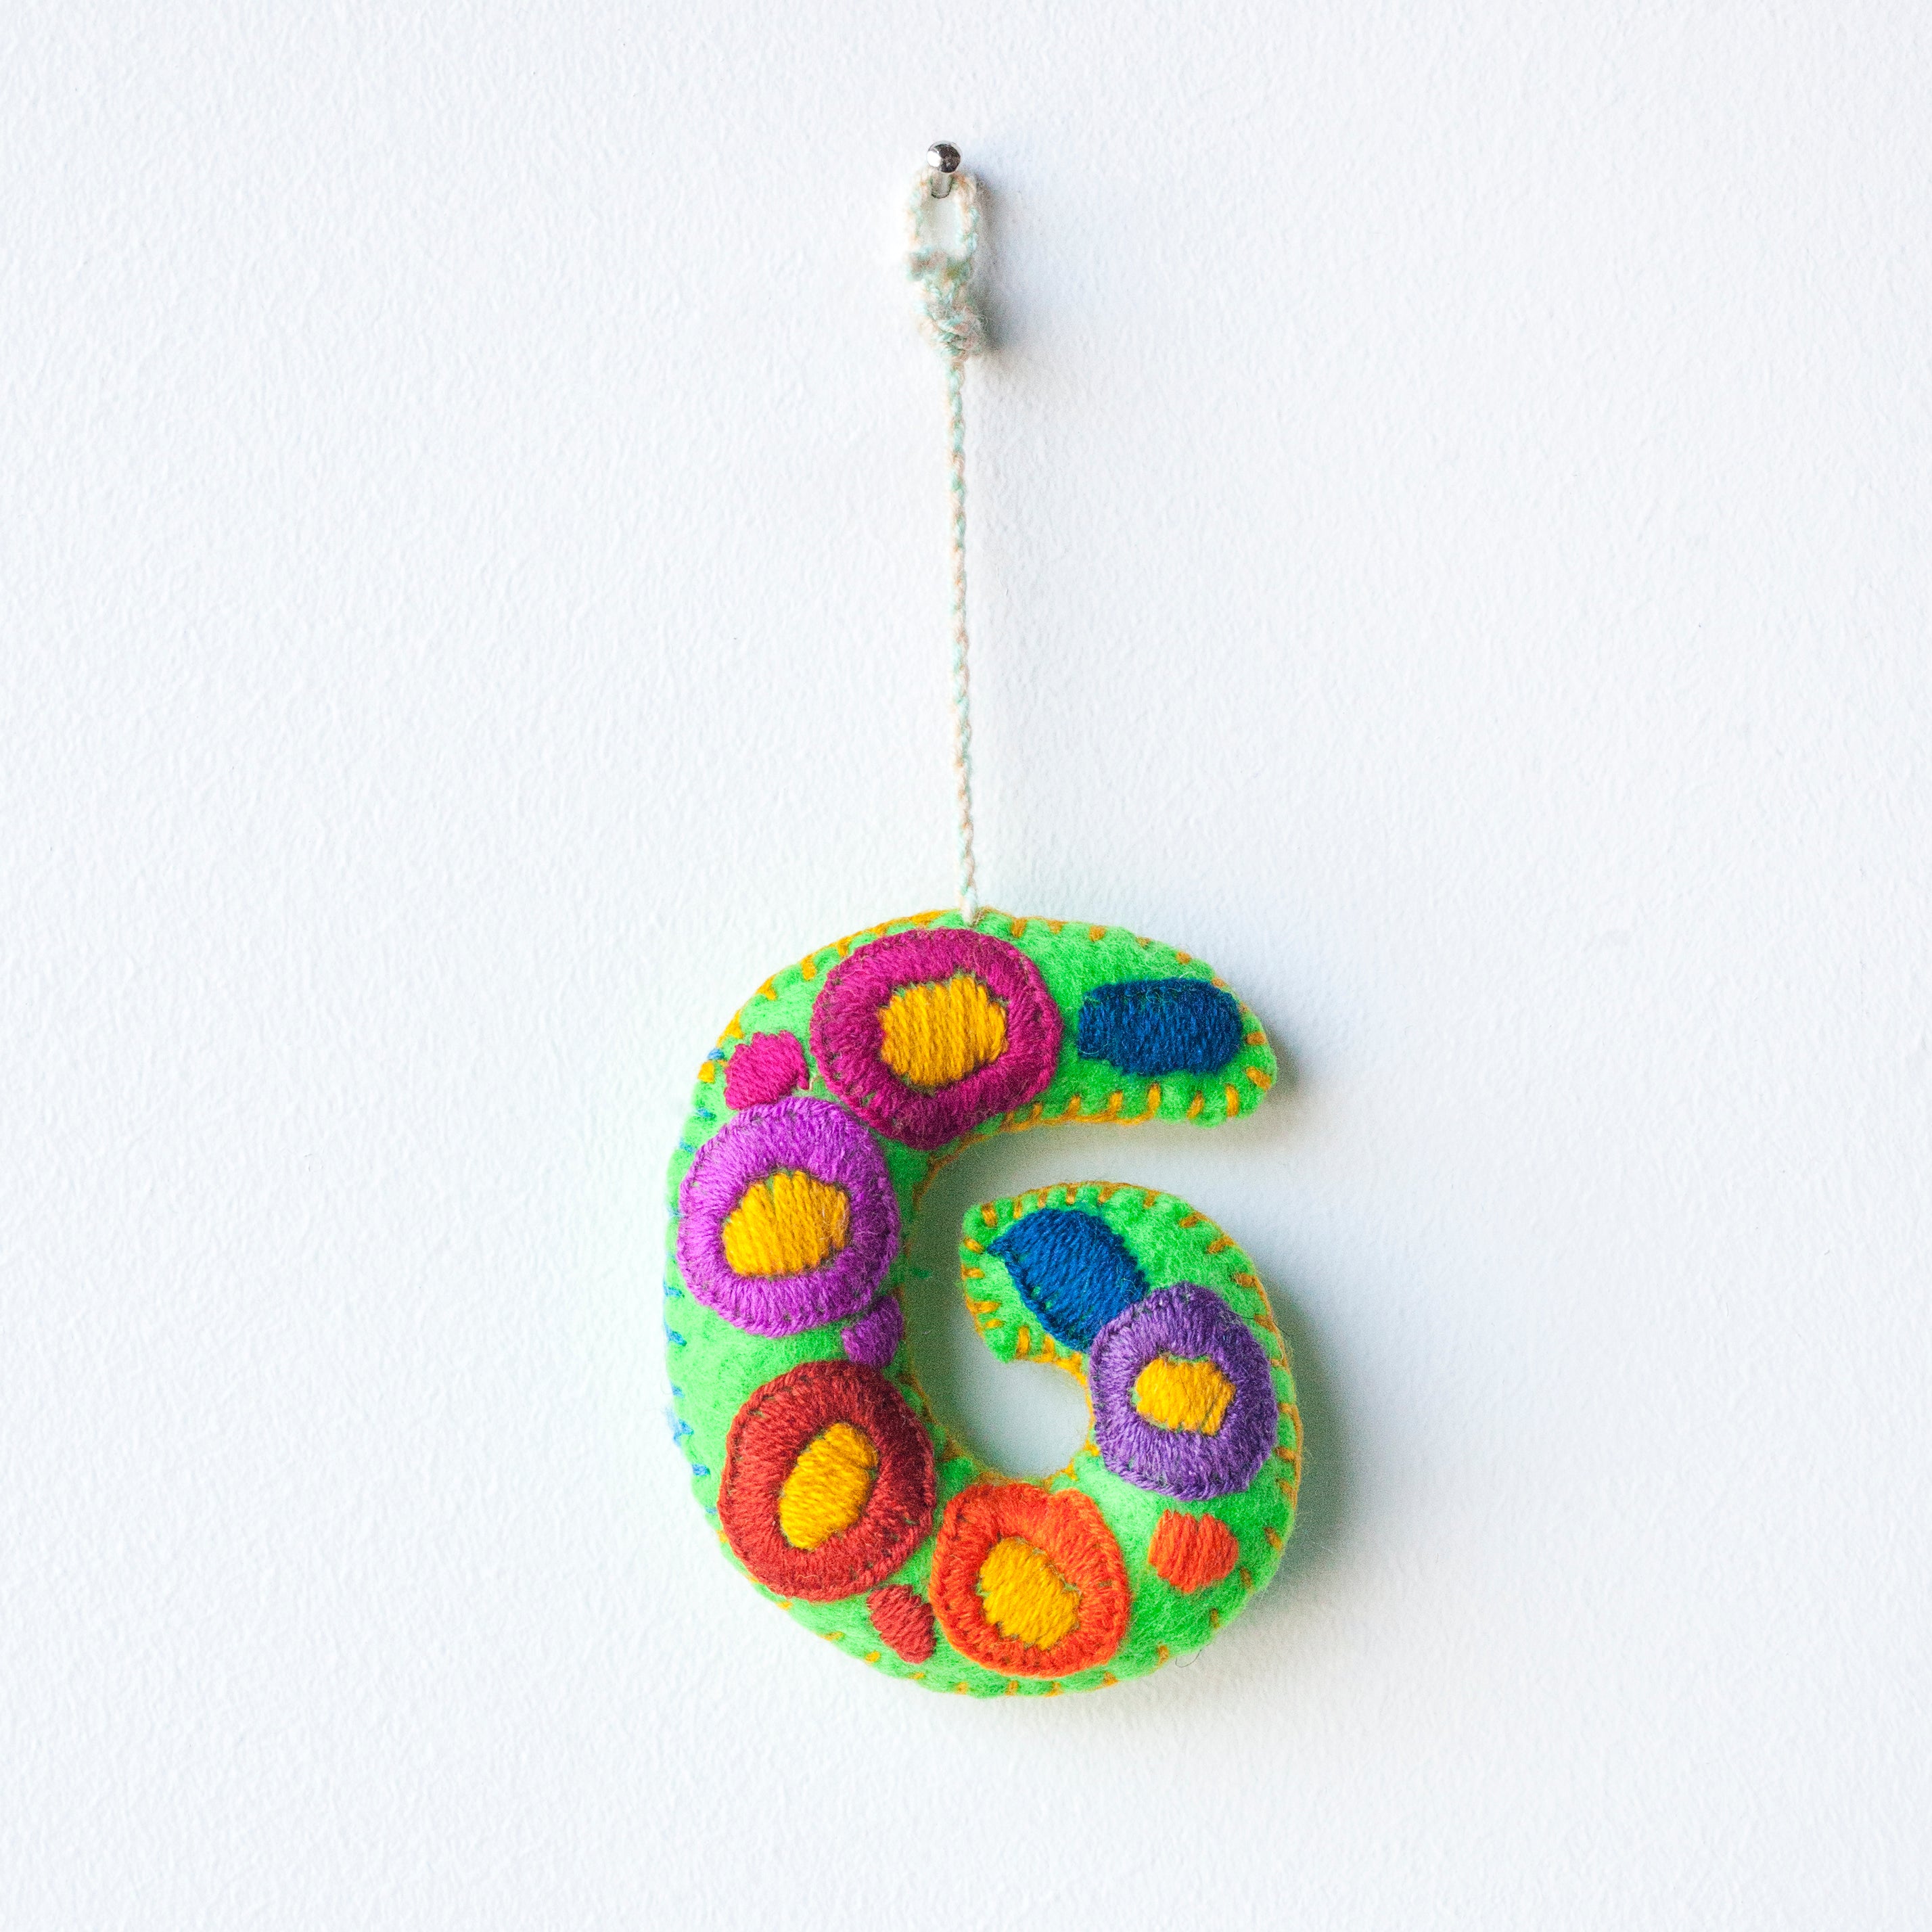 Colorful felt letter "G" with multicolor floral hand-embroidery hanging by a colorful string.